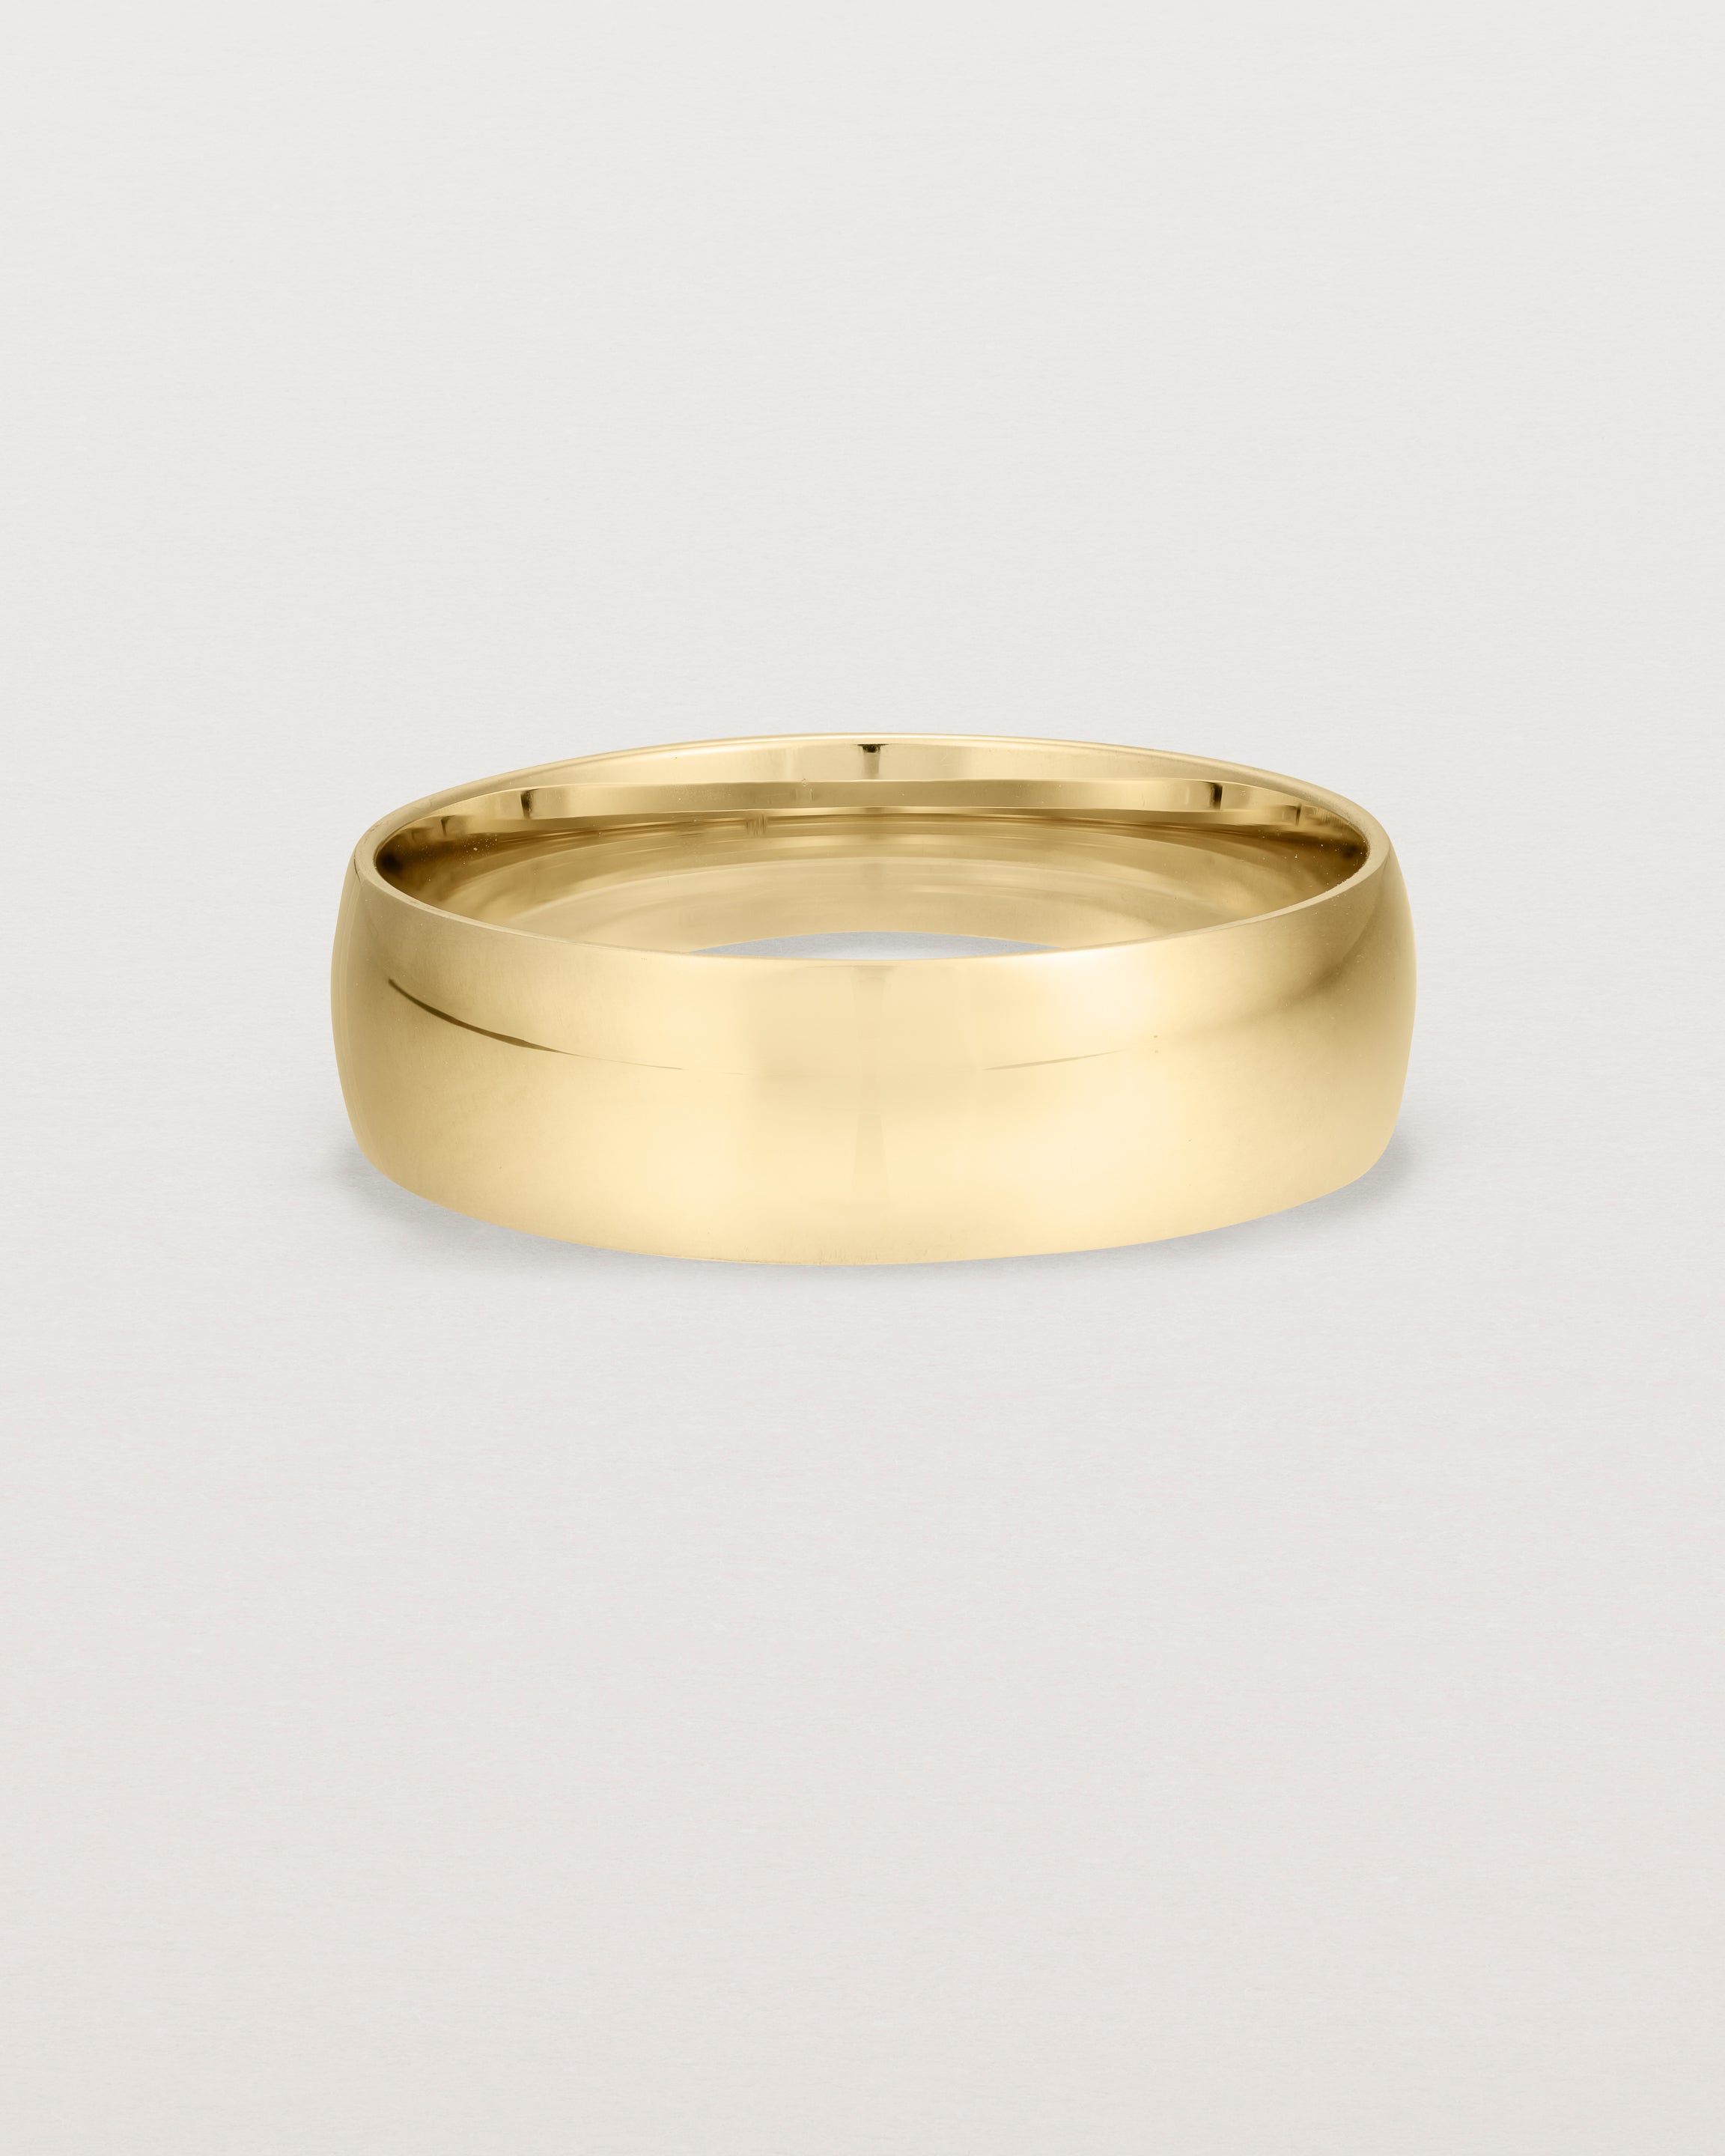 A bold 6mm wedding band crafted in yellow gold